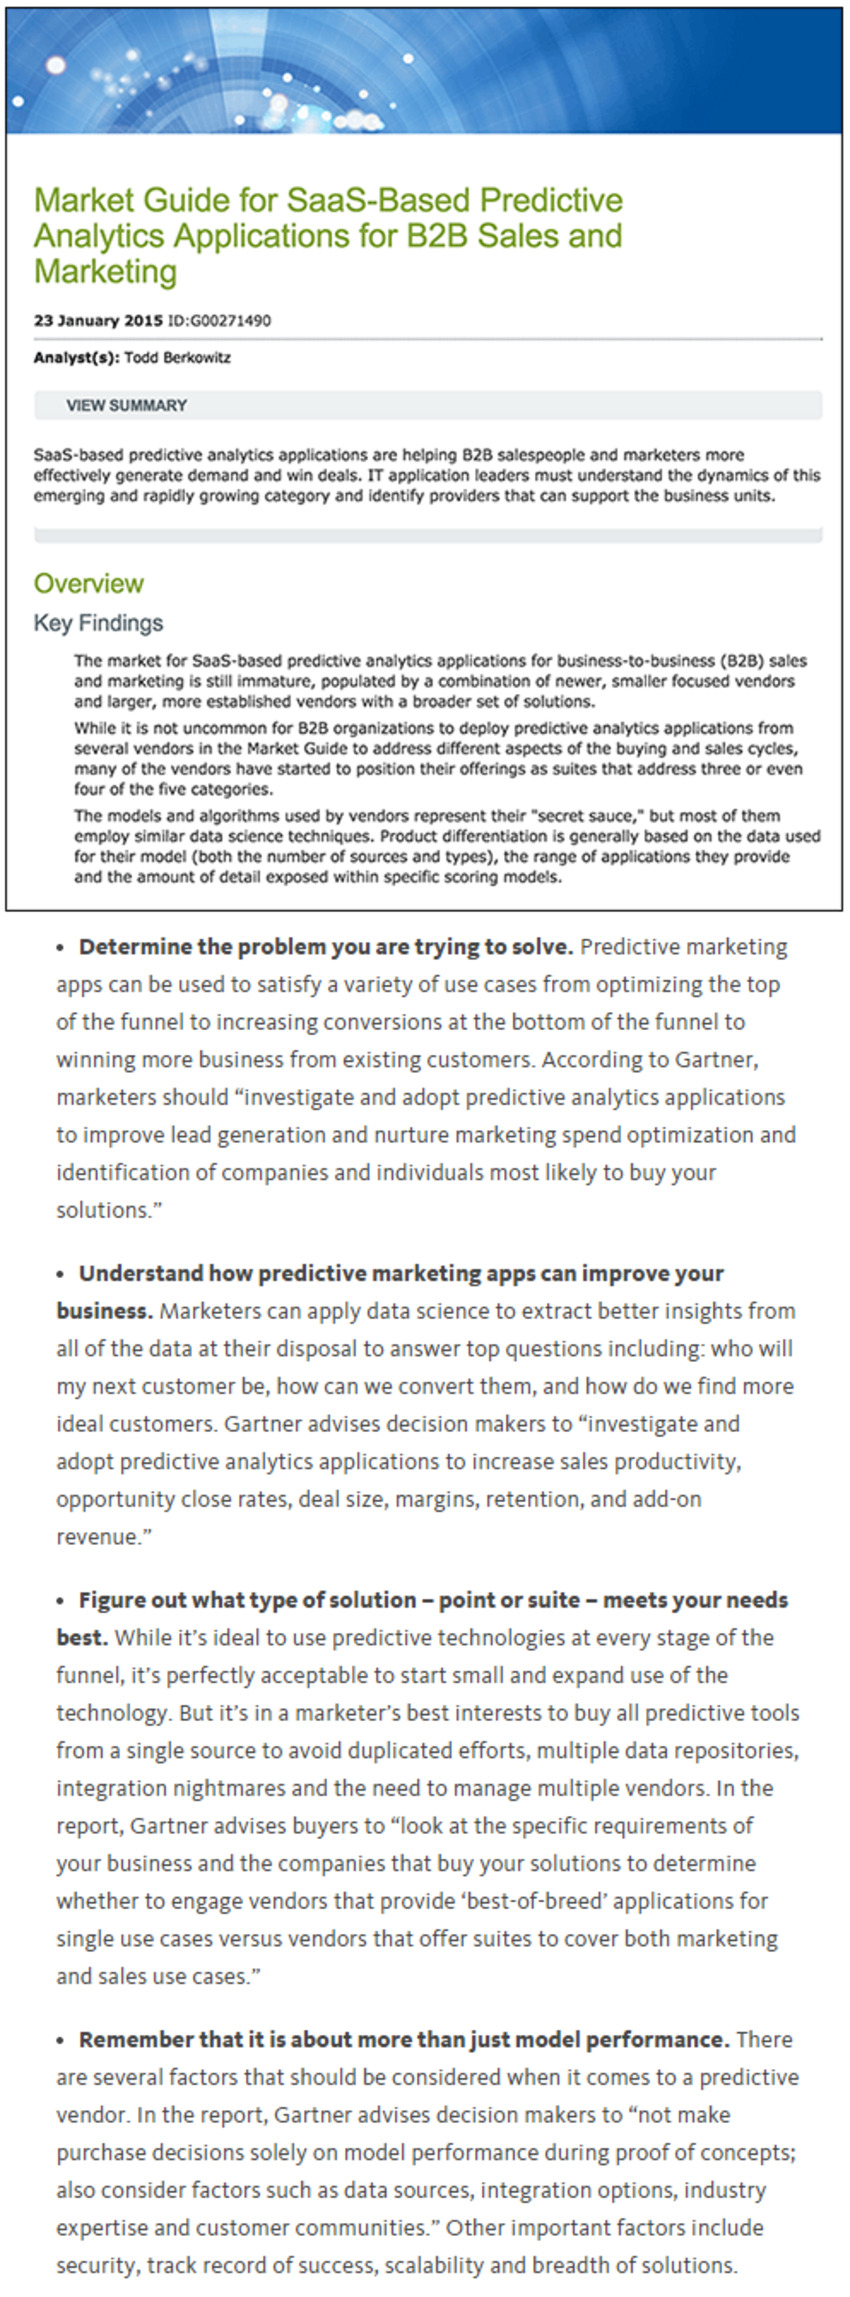 [FREE REPORT] Dissecting the Predictive Marketing and Sales Market: A Look from Gartner | Lattice Engines | The MarTech Digest | Scoop.it